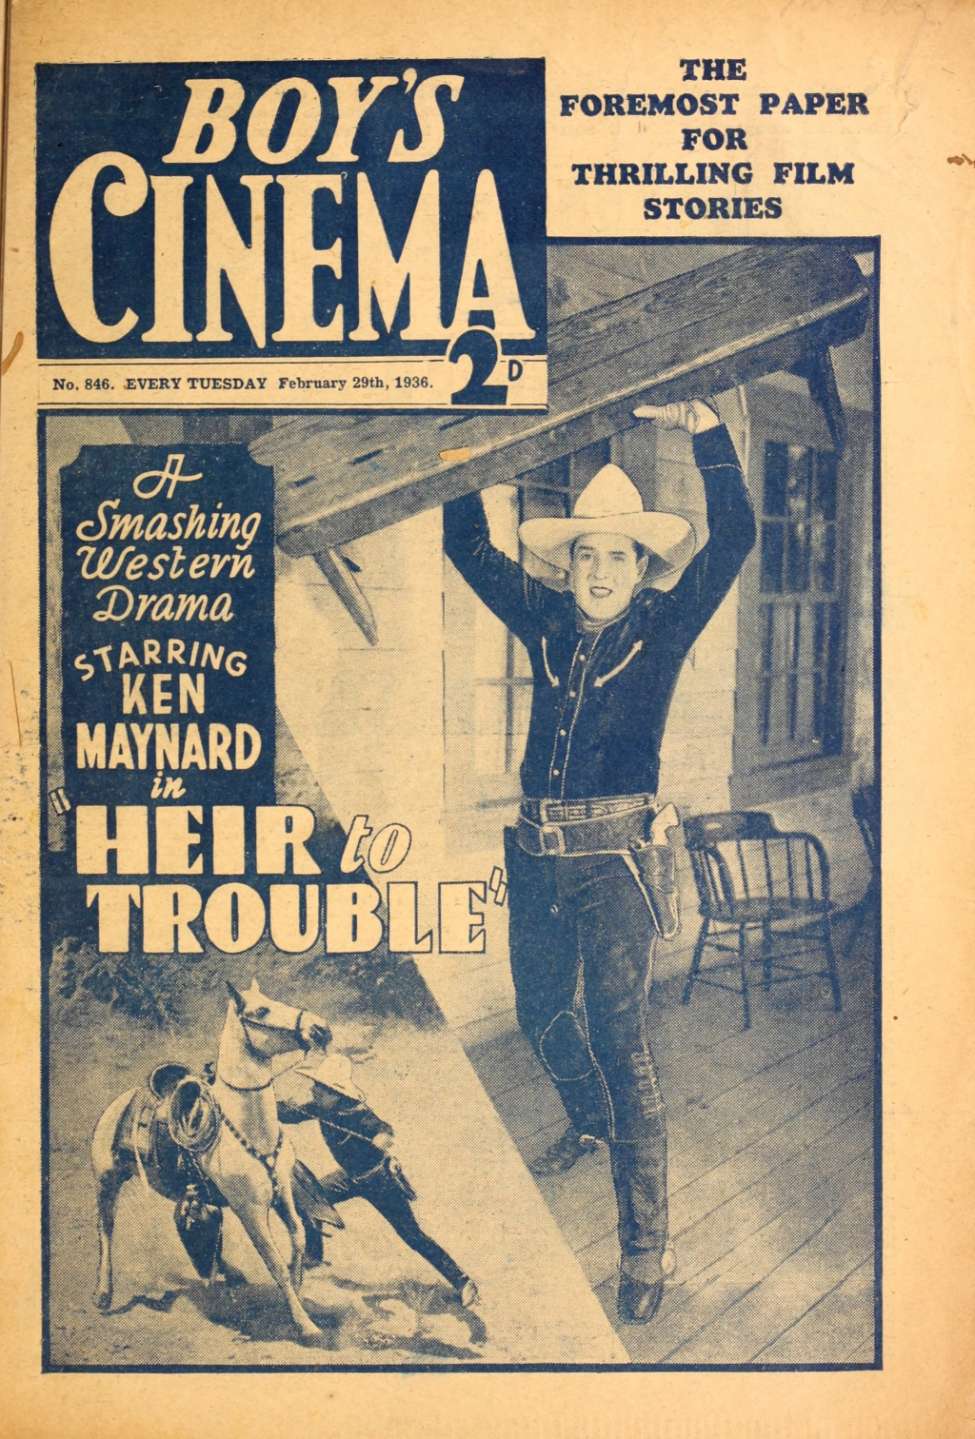 Comic Book Cover For Boy's Cinema 846 - Heir to Trouble - Ken Maynard